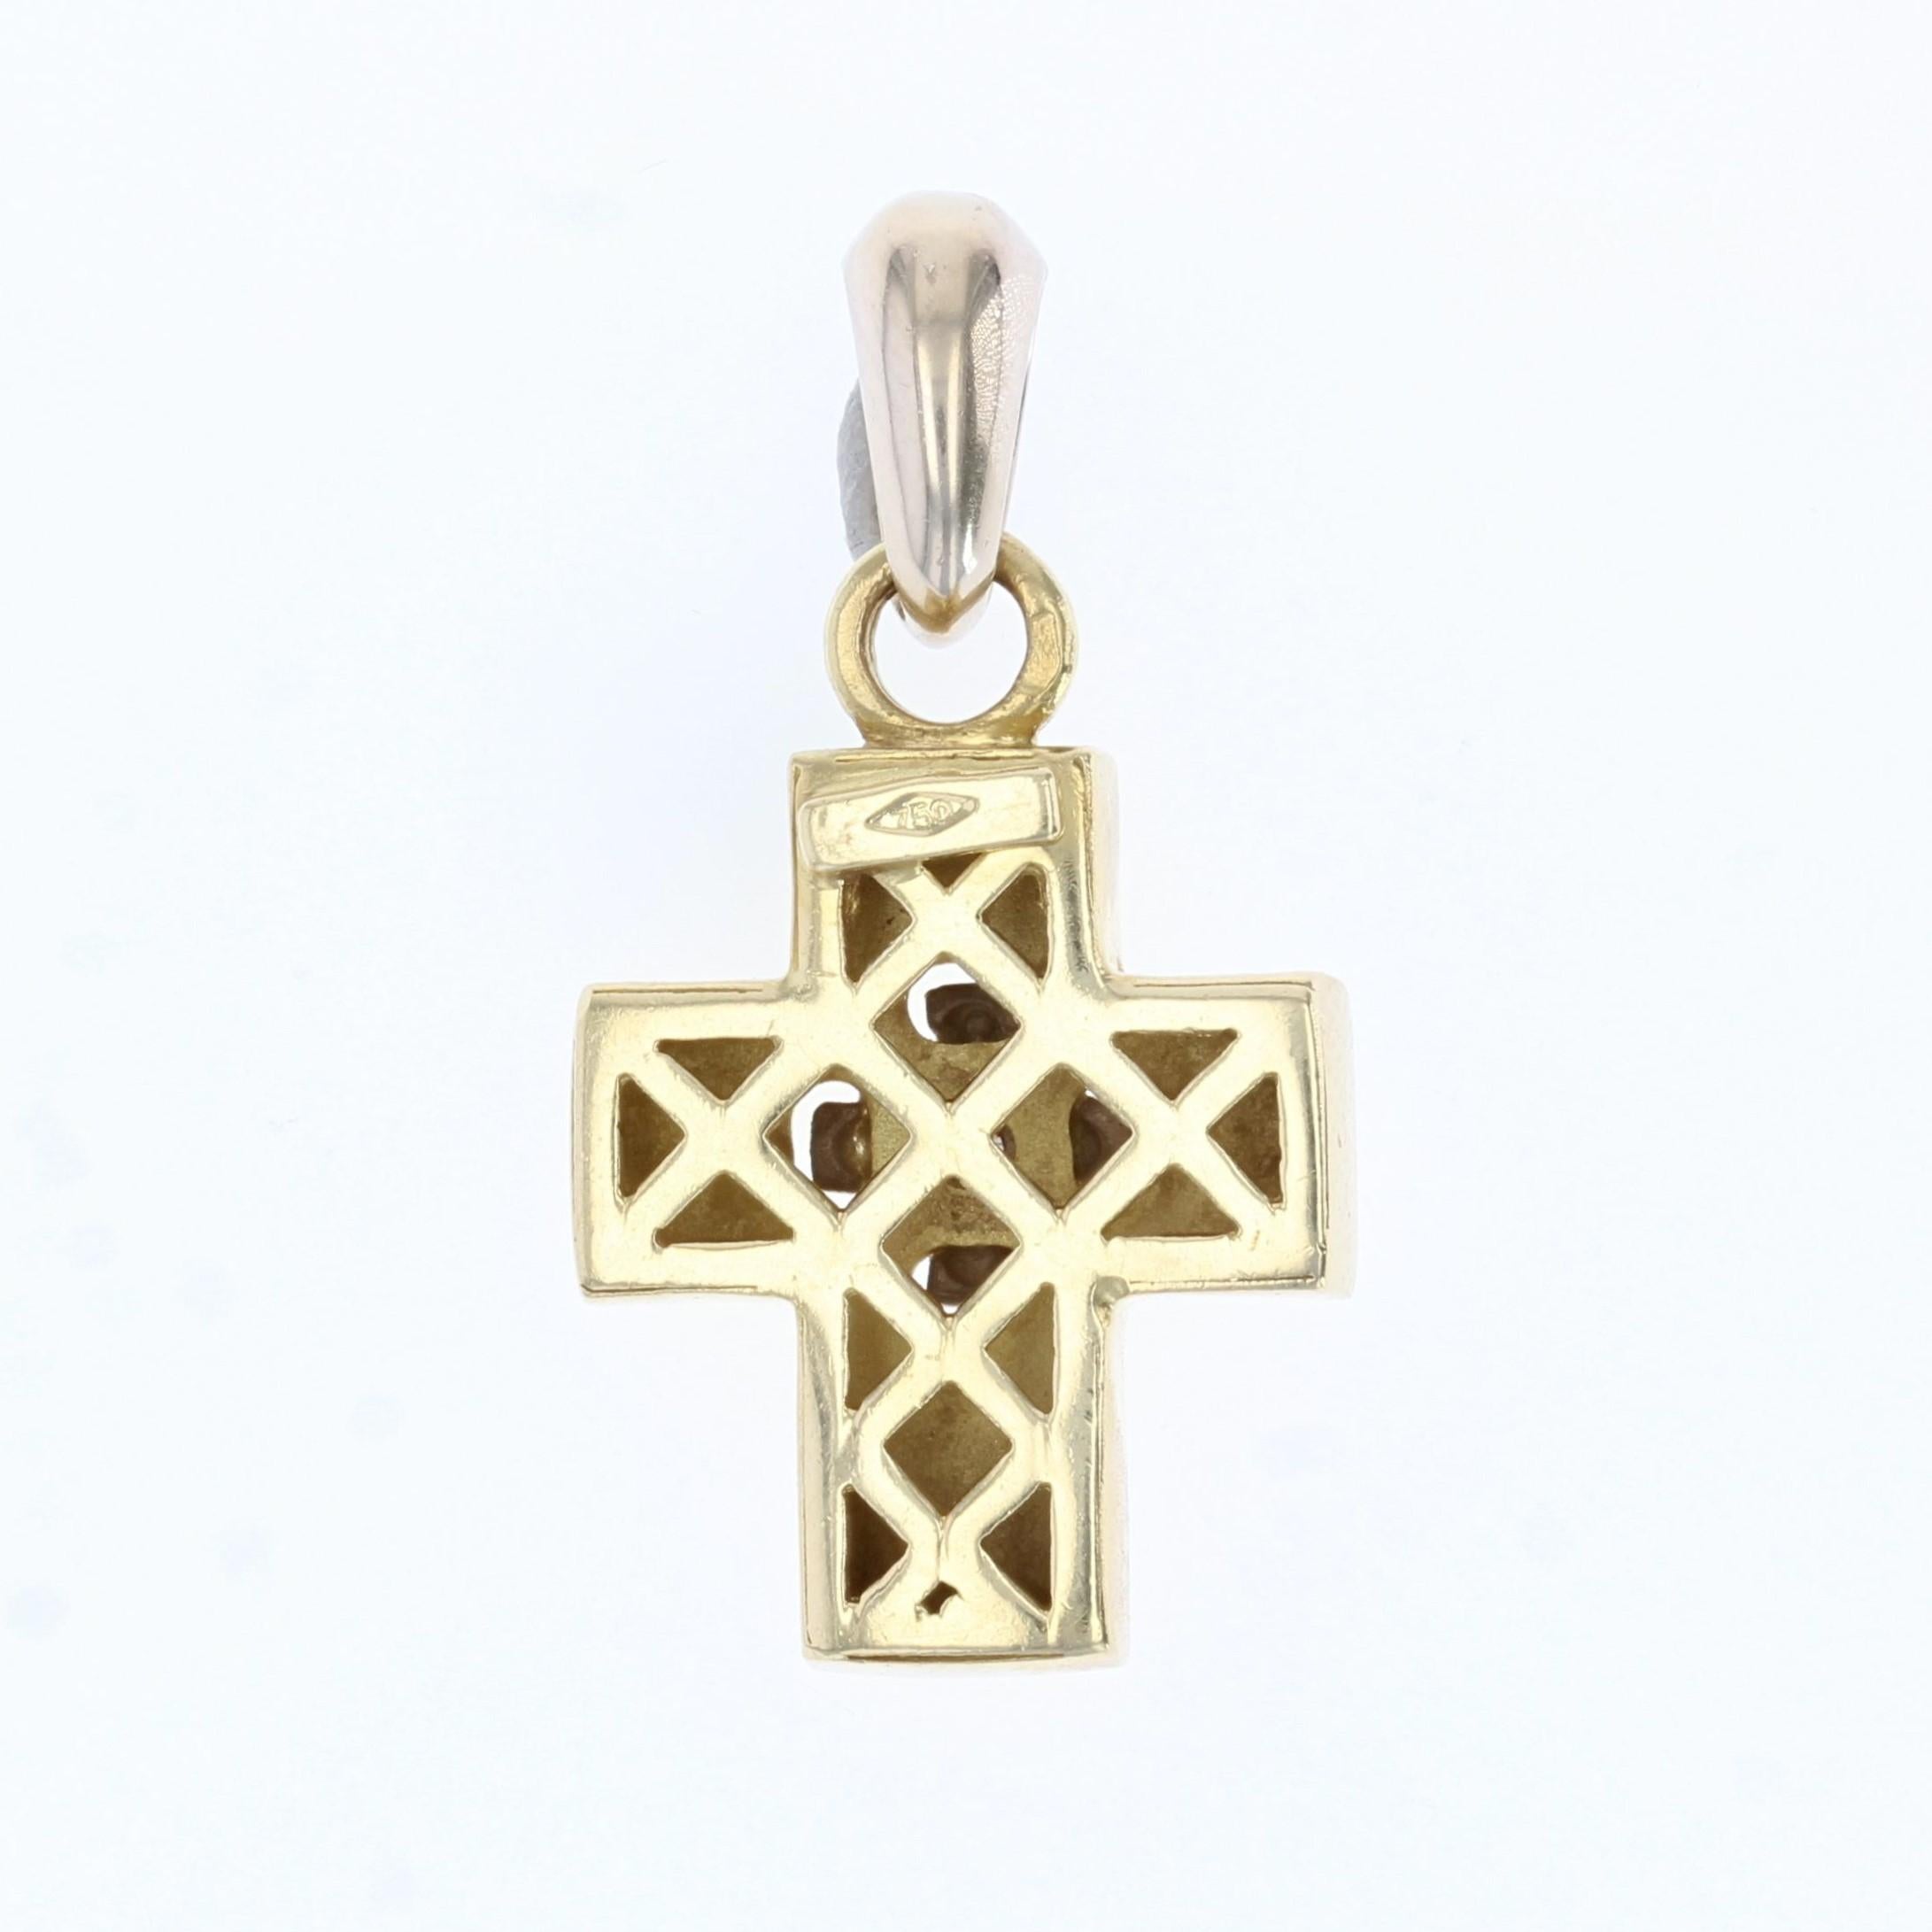 cross necklace with diamond in the middle